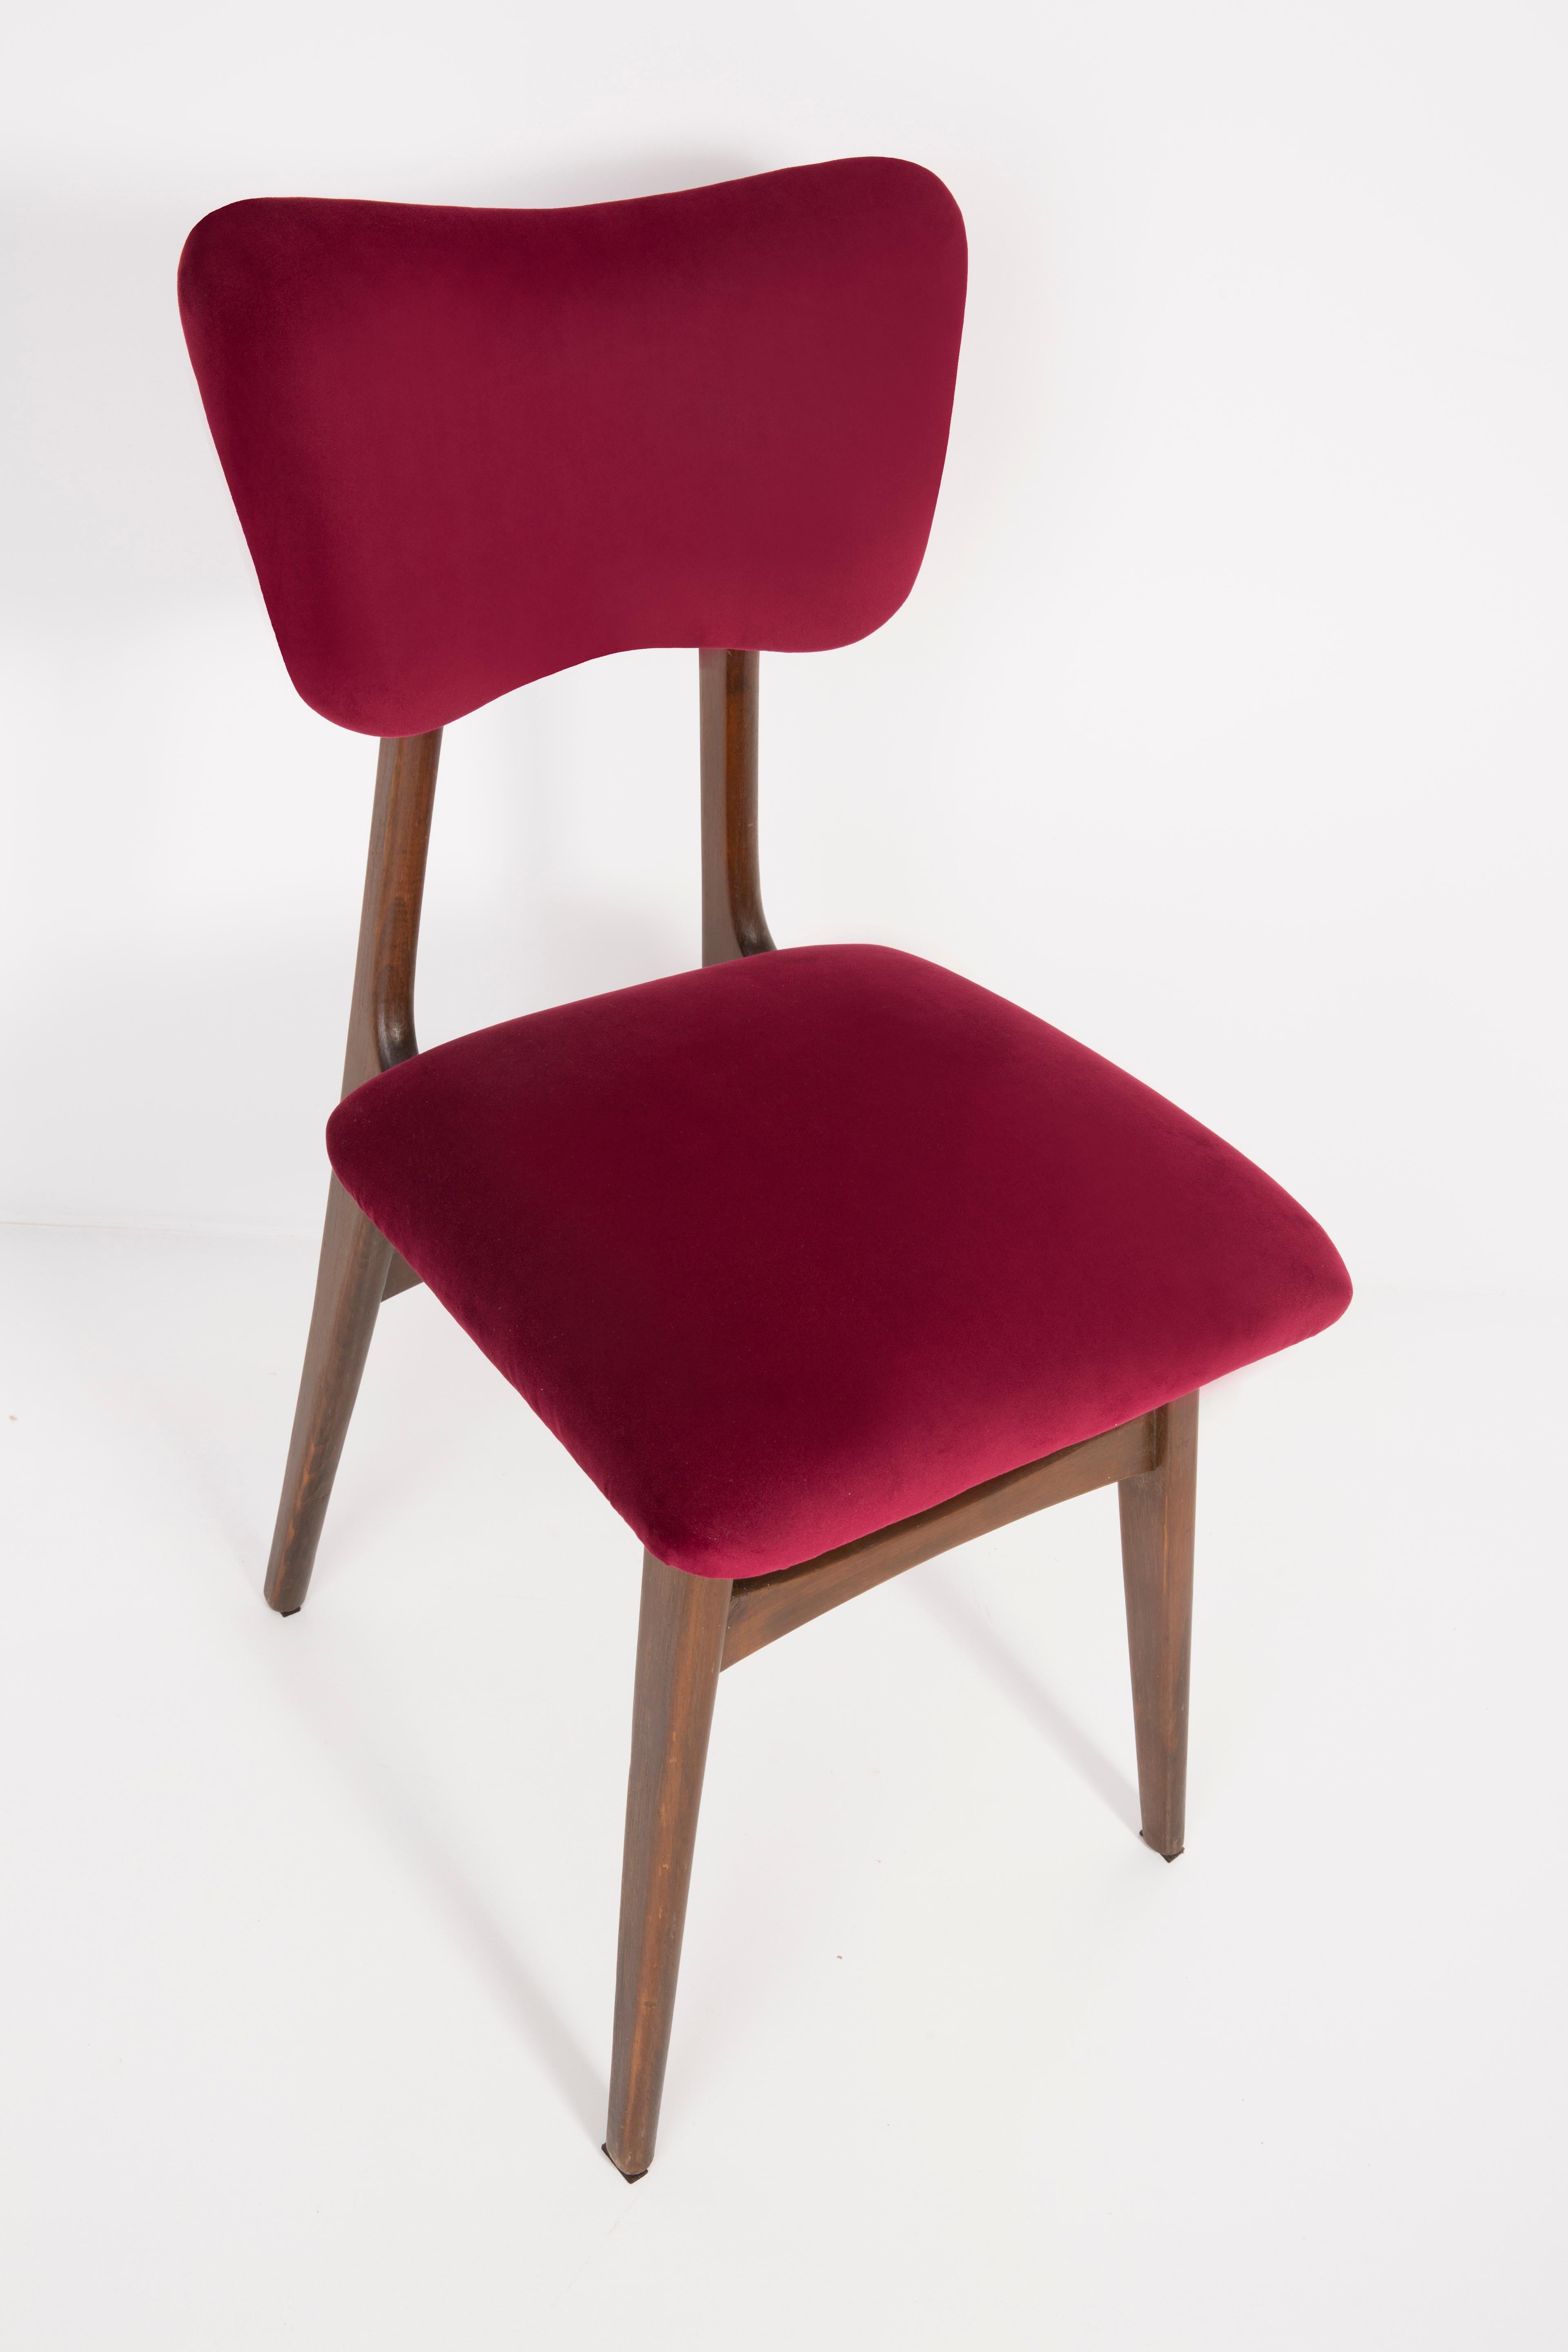 20th Century Burgundy Red Chair, 1960s For Sale 2